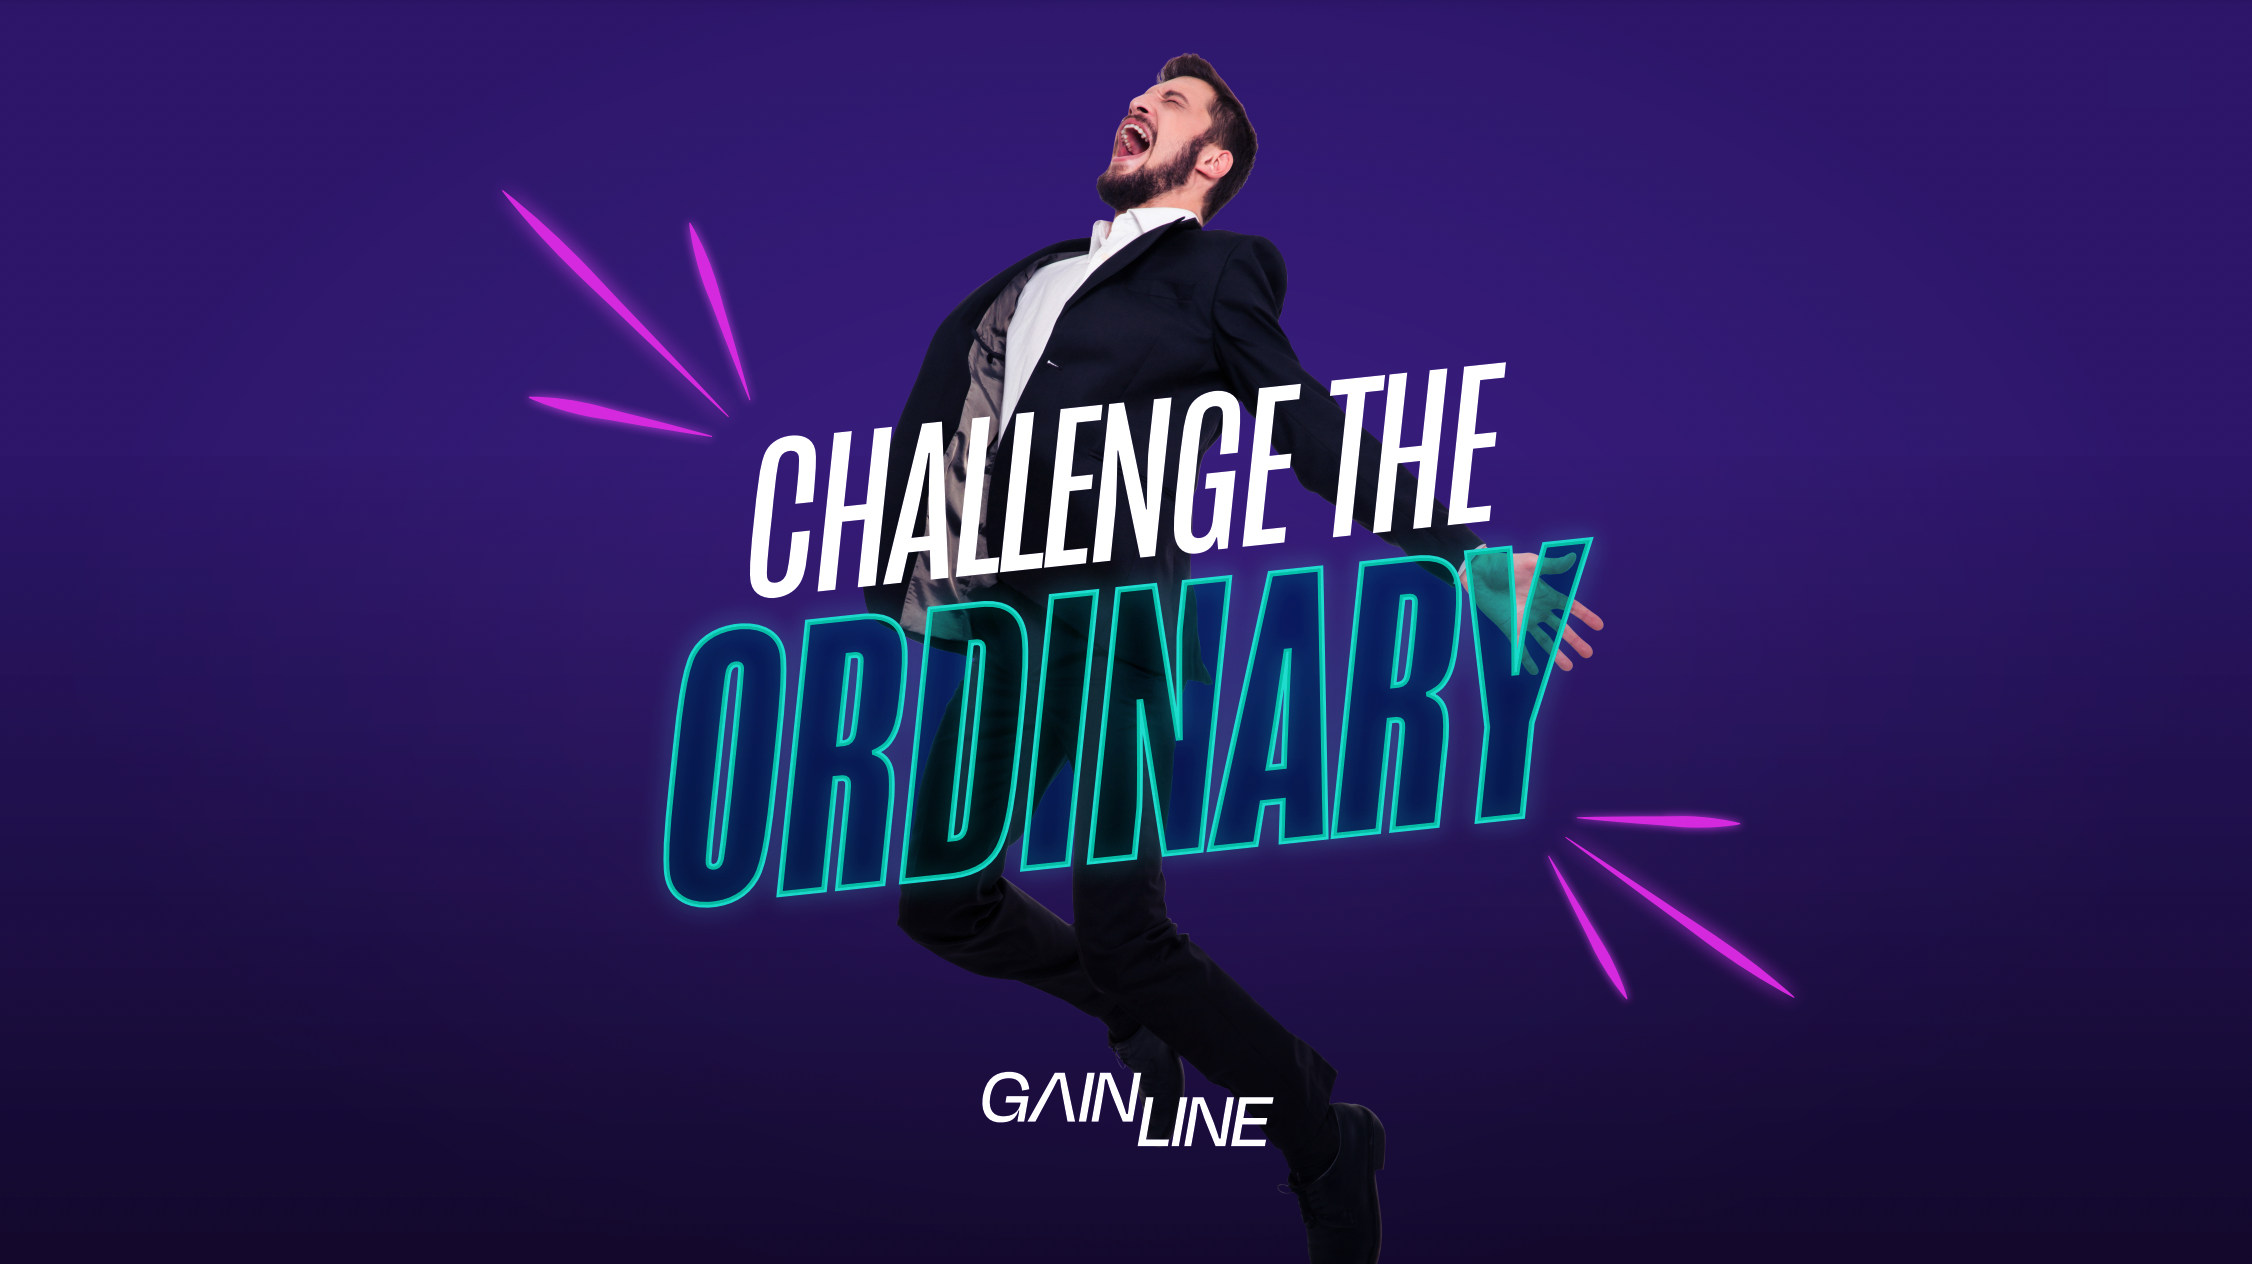 Challenge the ordinary with our business consultancy